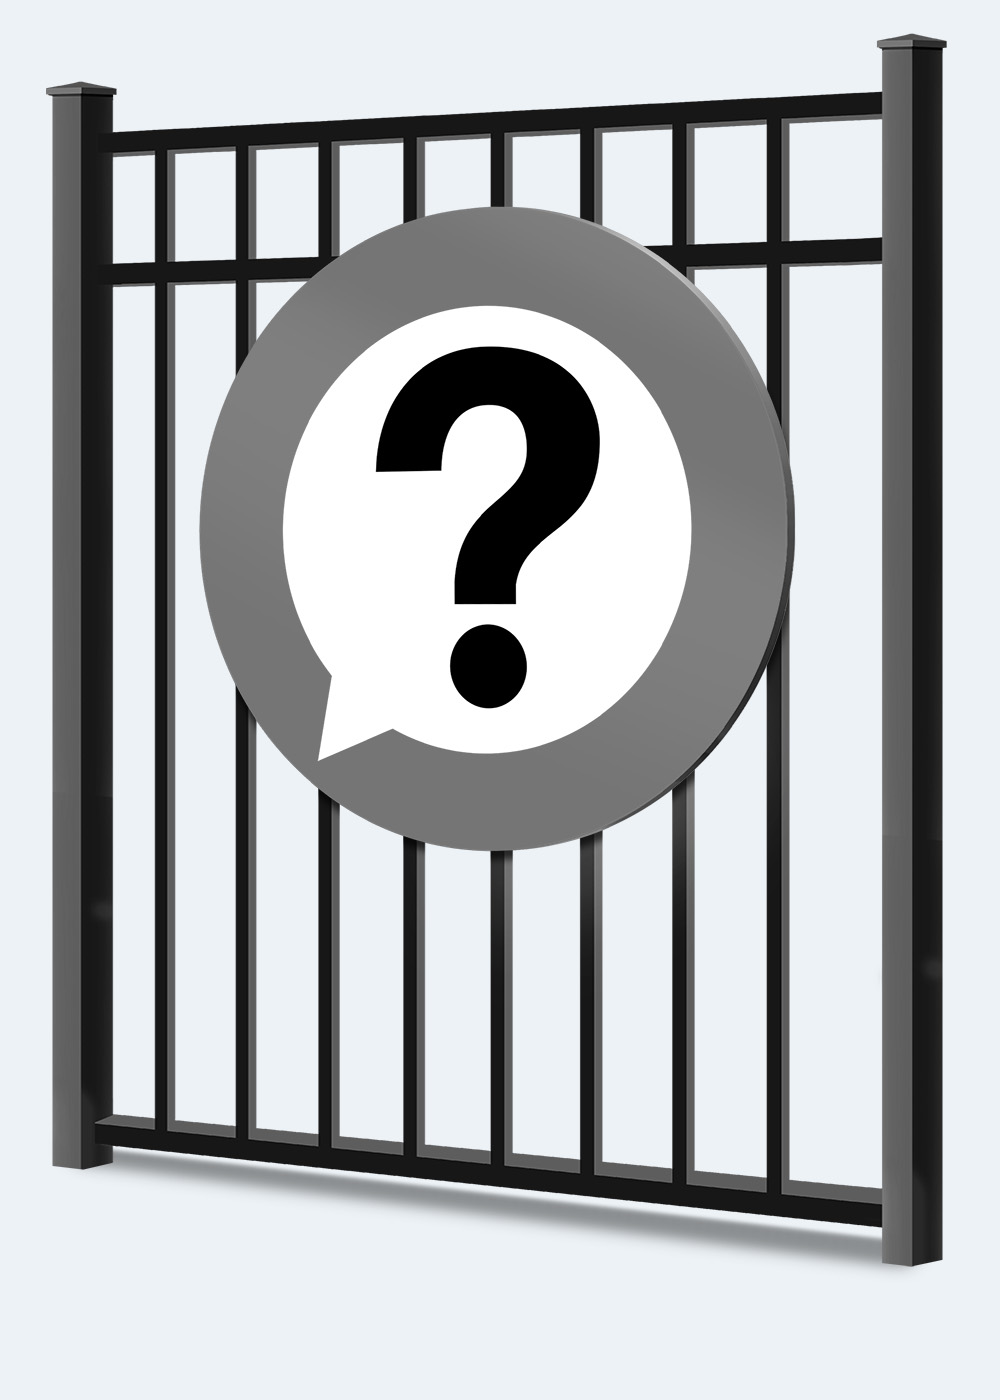 Chain Link fence FAQs in the Westchester County area